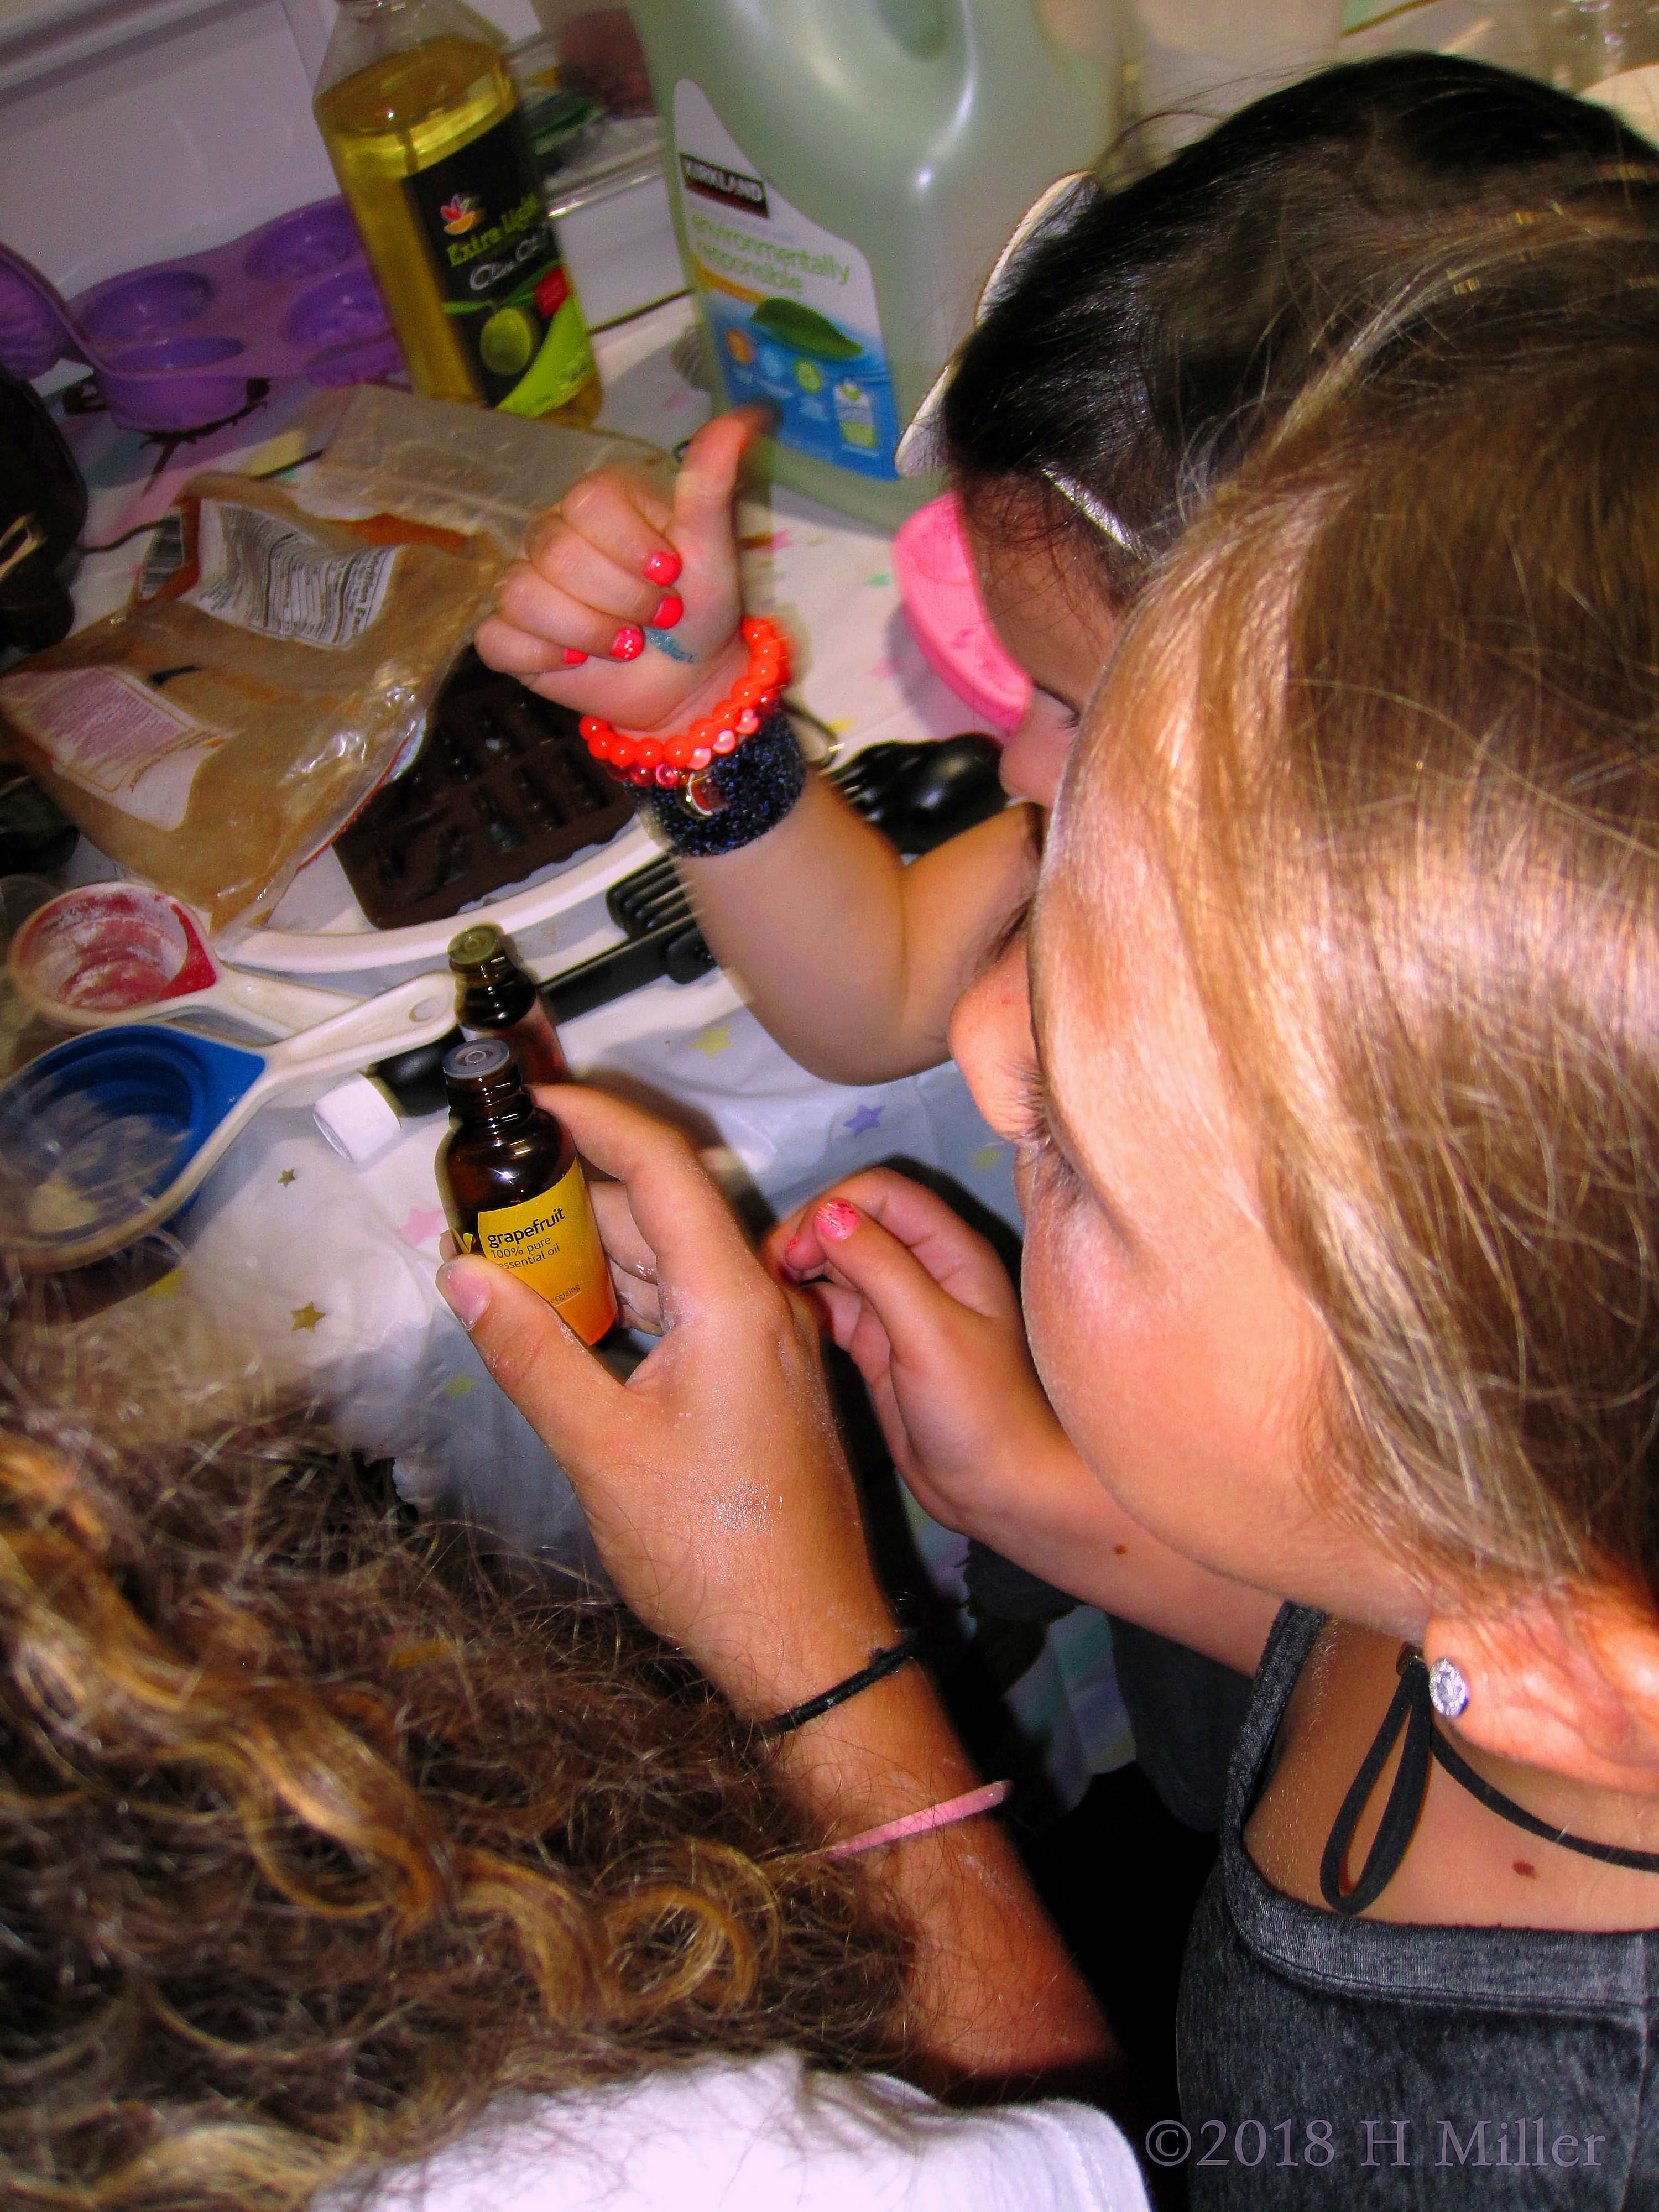 Using Various Ingredients Like Essential Oils For The Making Of Soap Kids Crafts! 